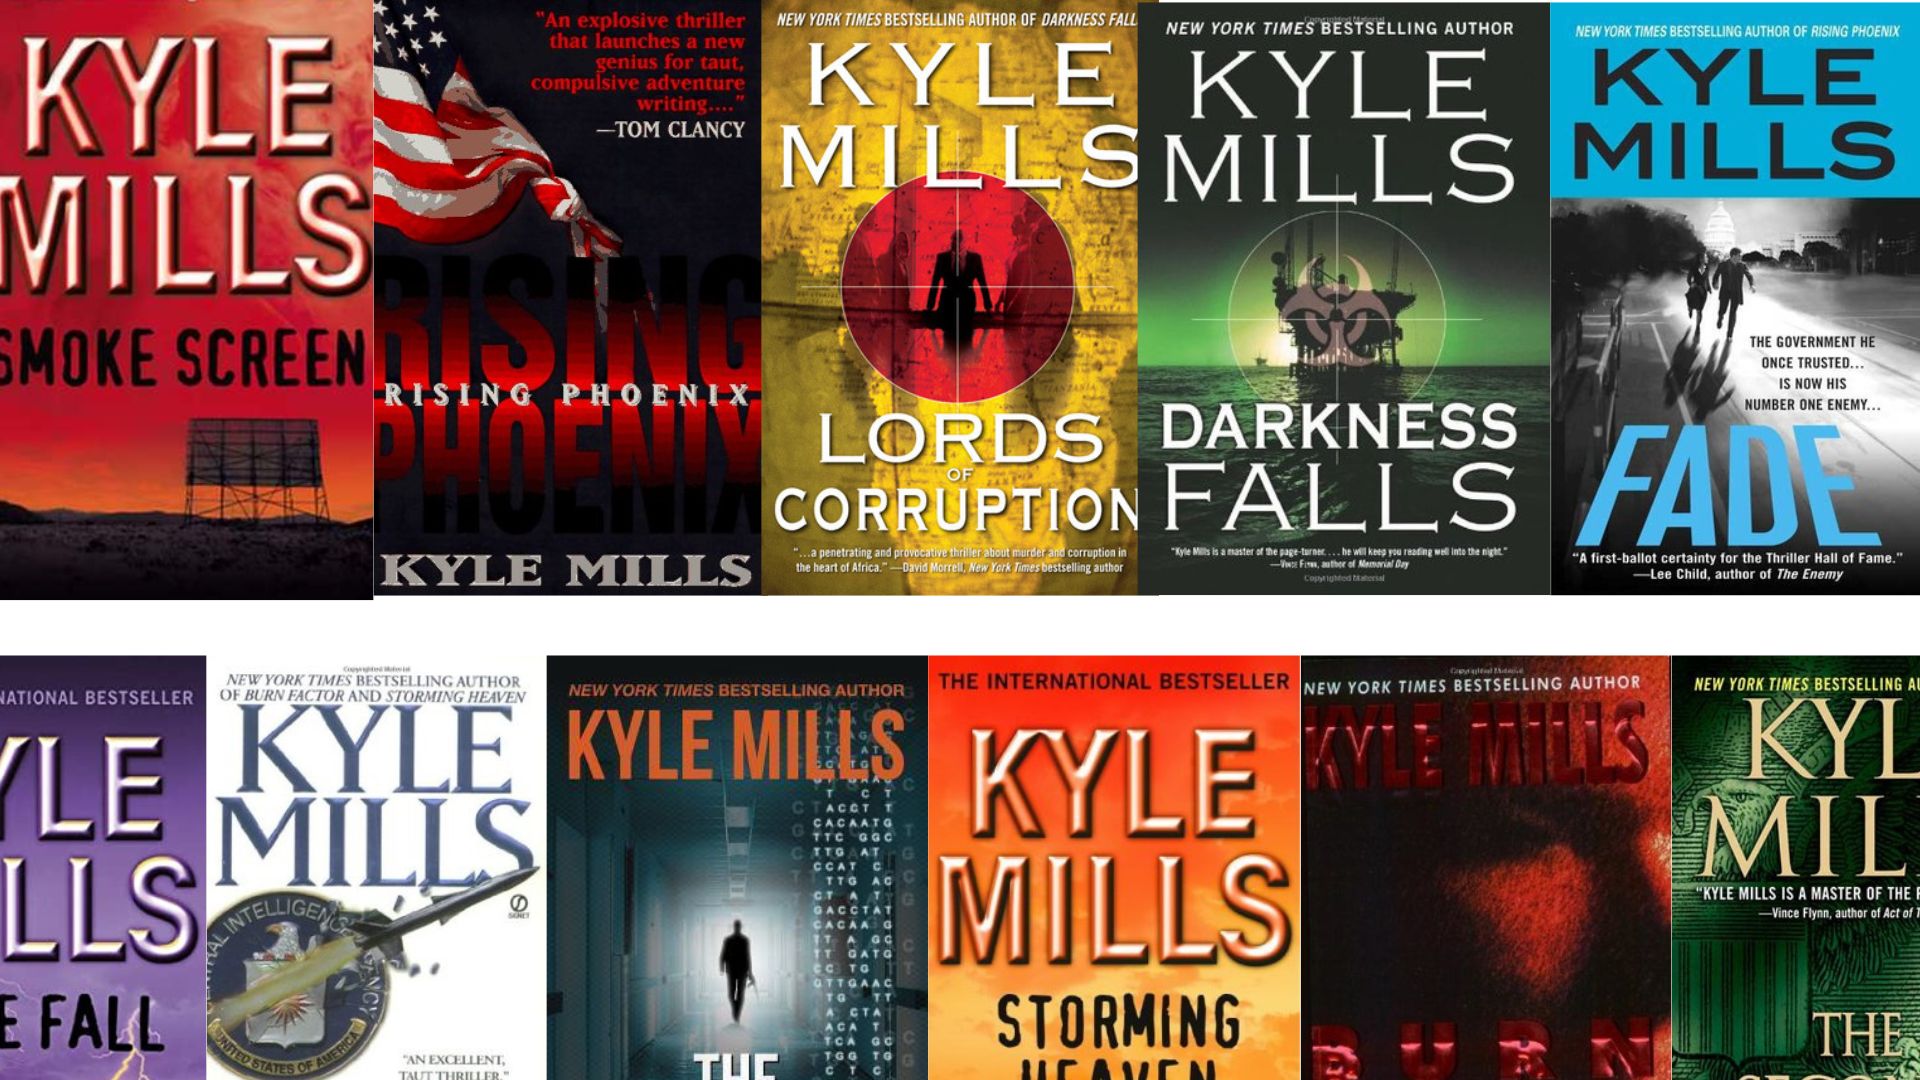 How To Read Kyle Mills Books In Order